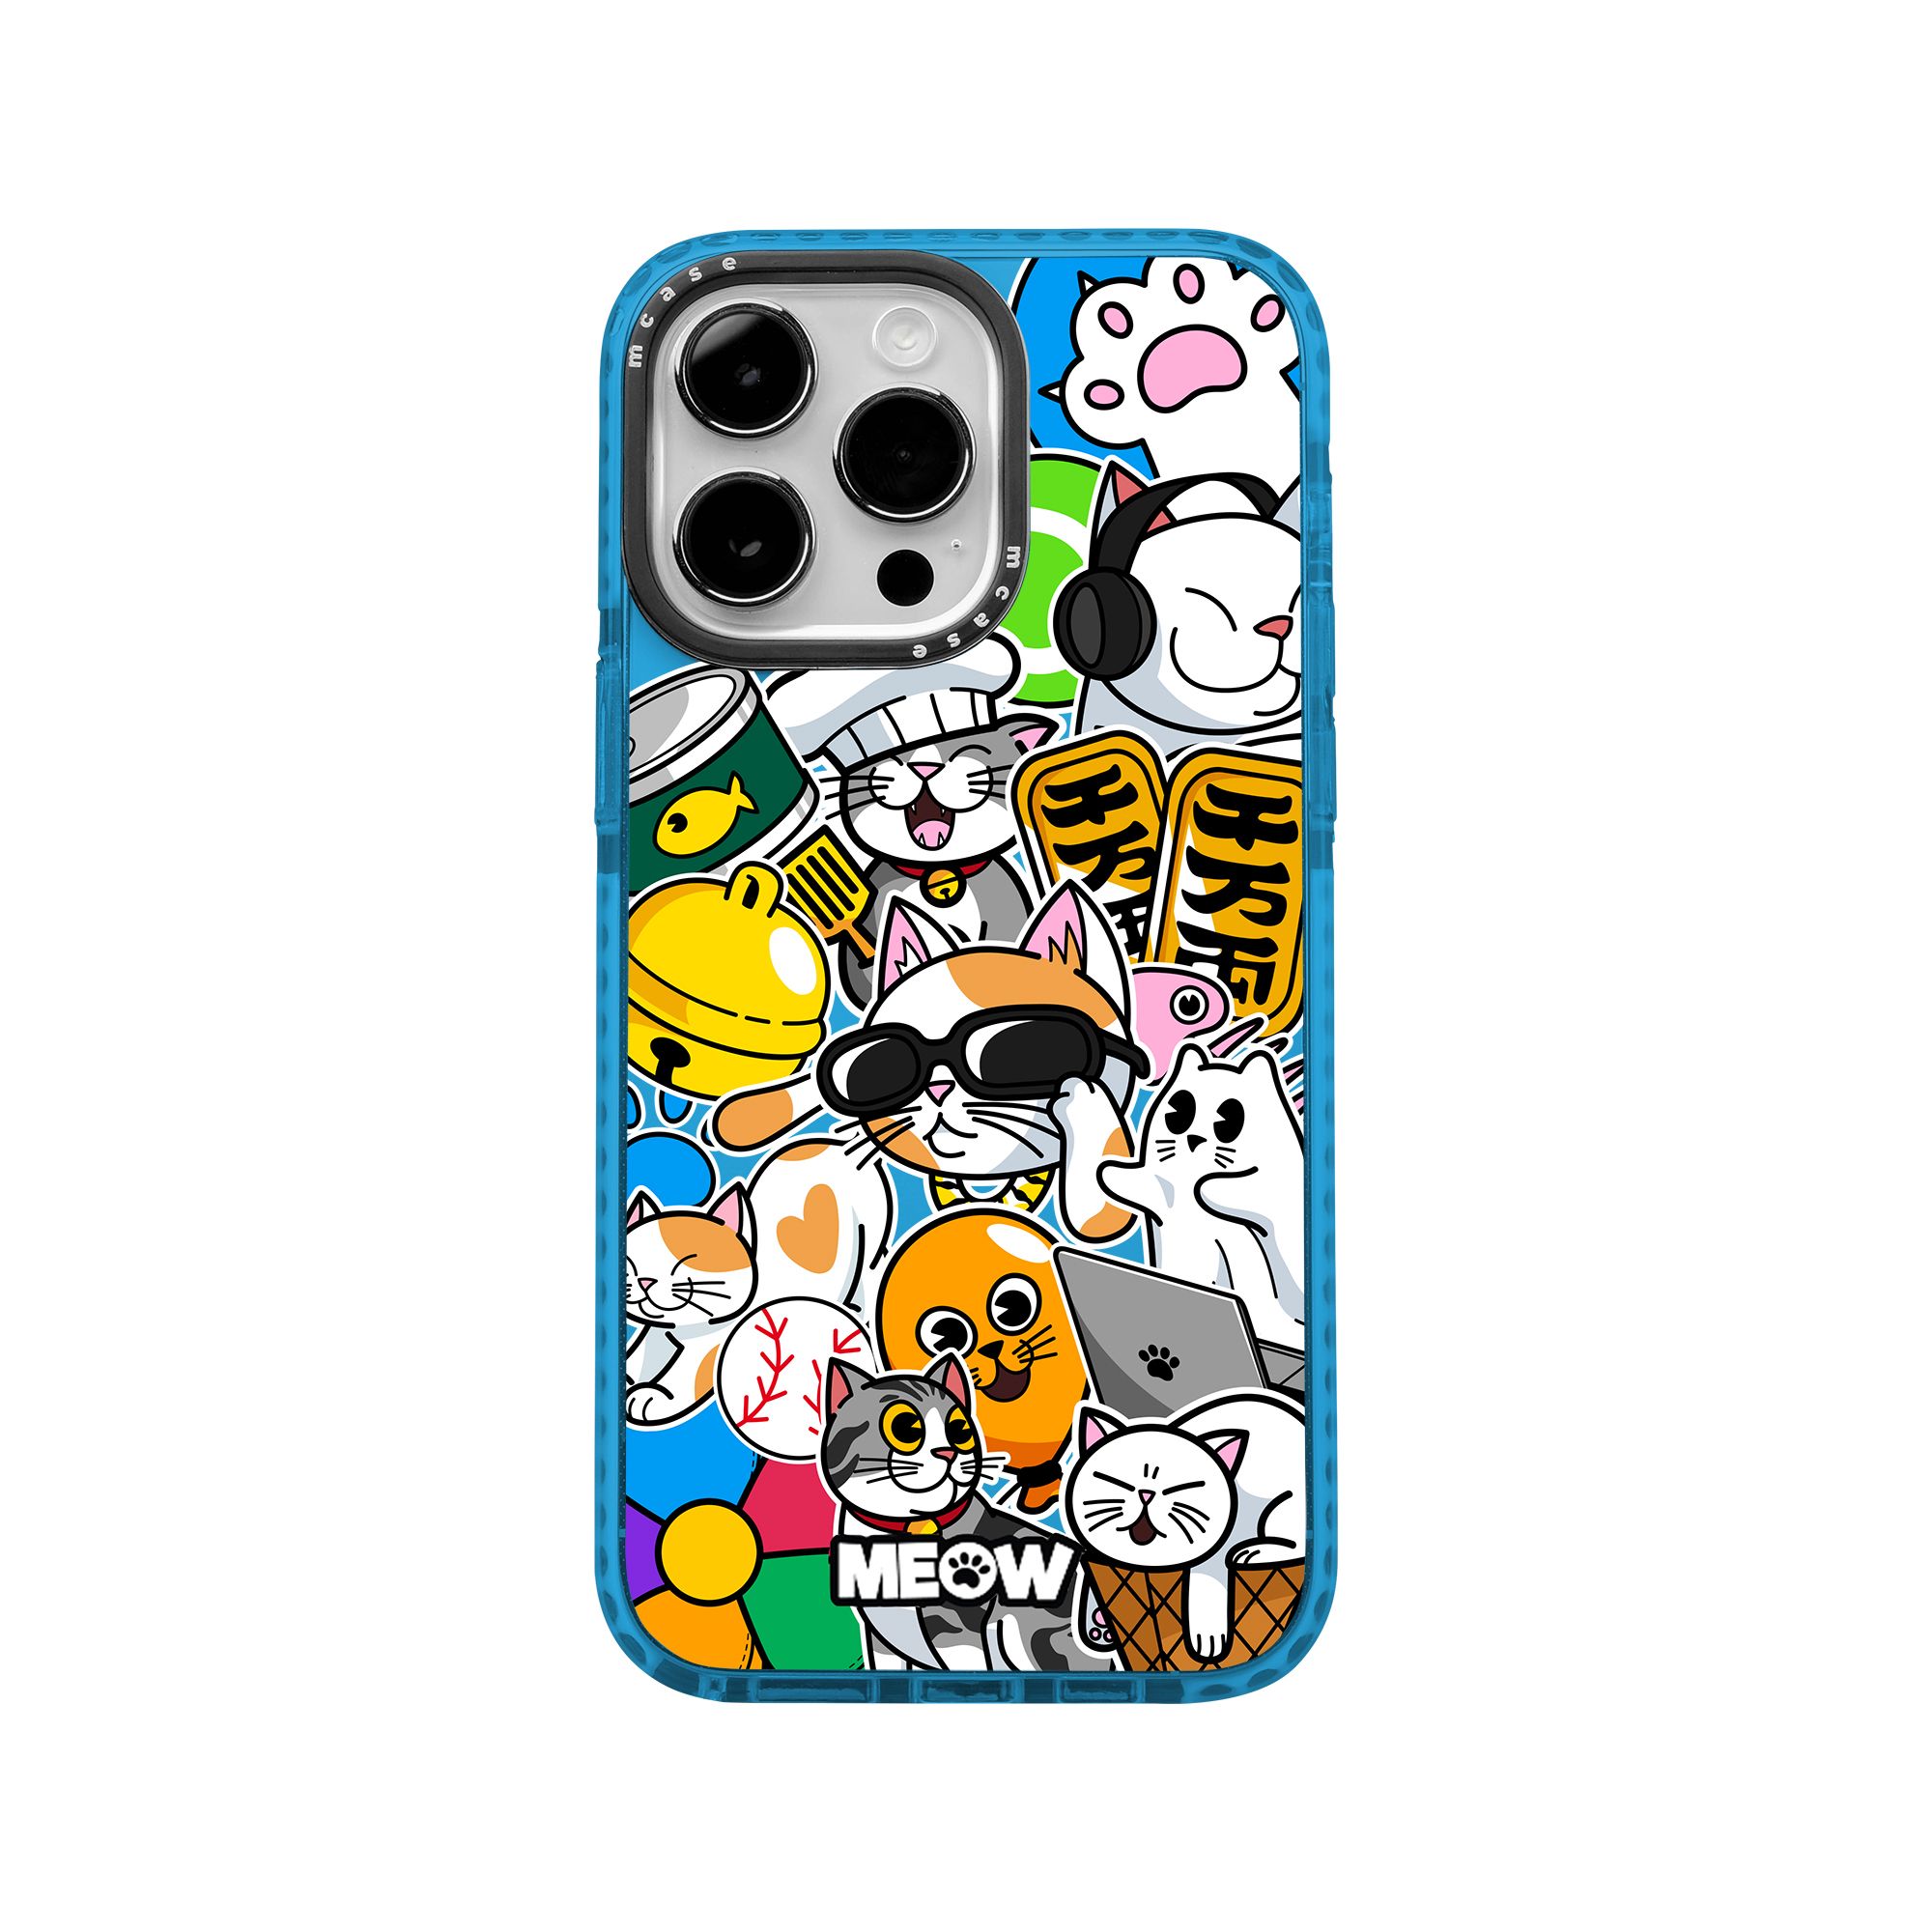  Ốp lưng iphone chống sốc Meow Stickers MCASE 